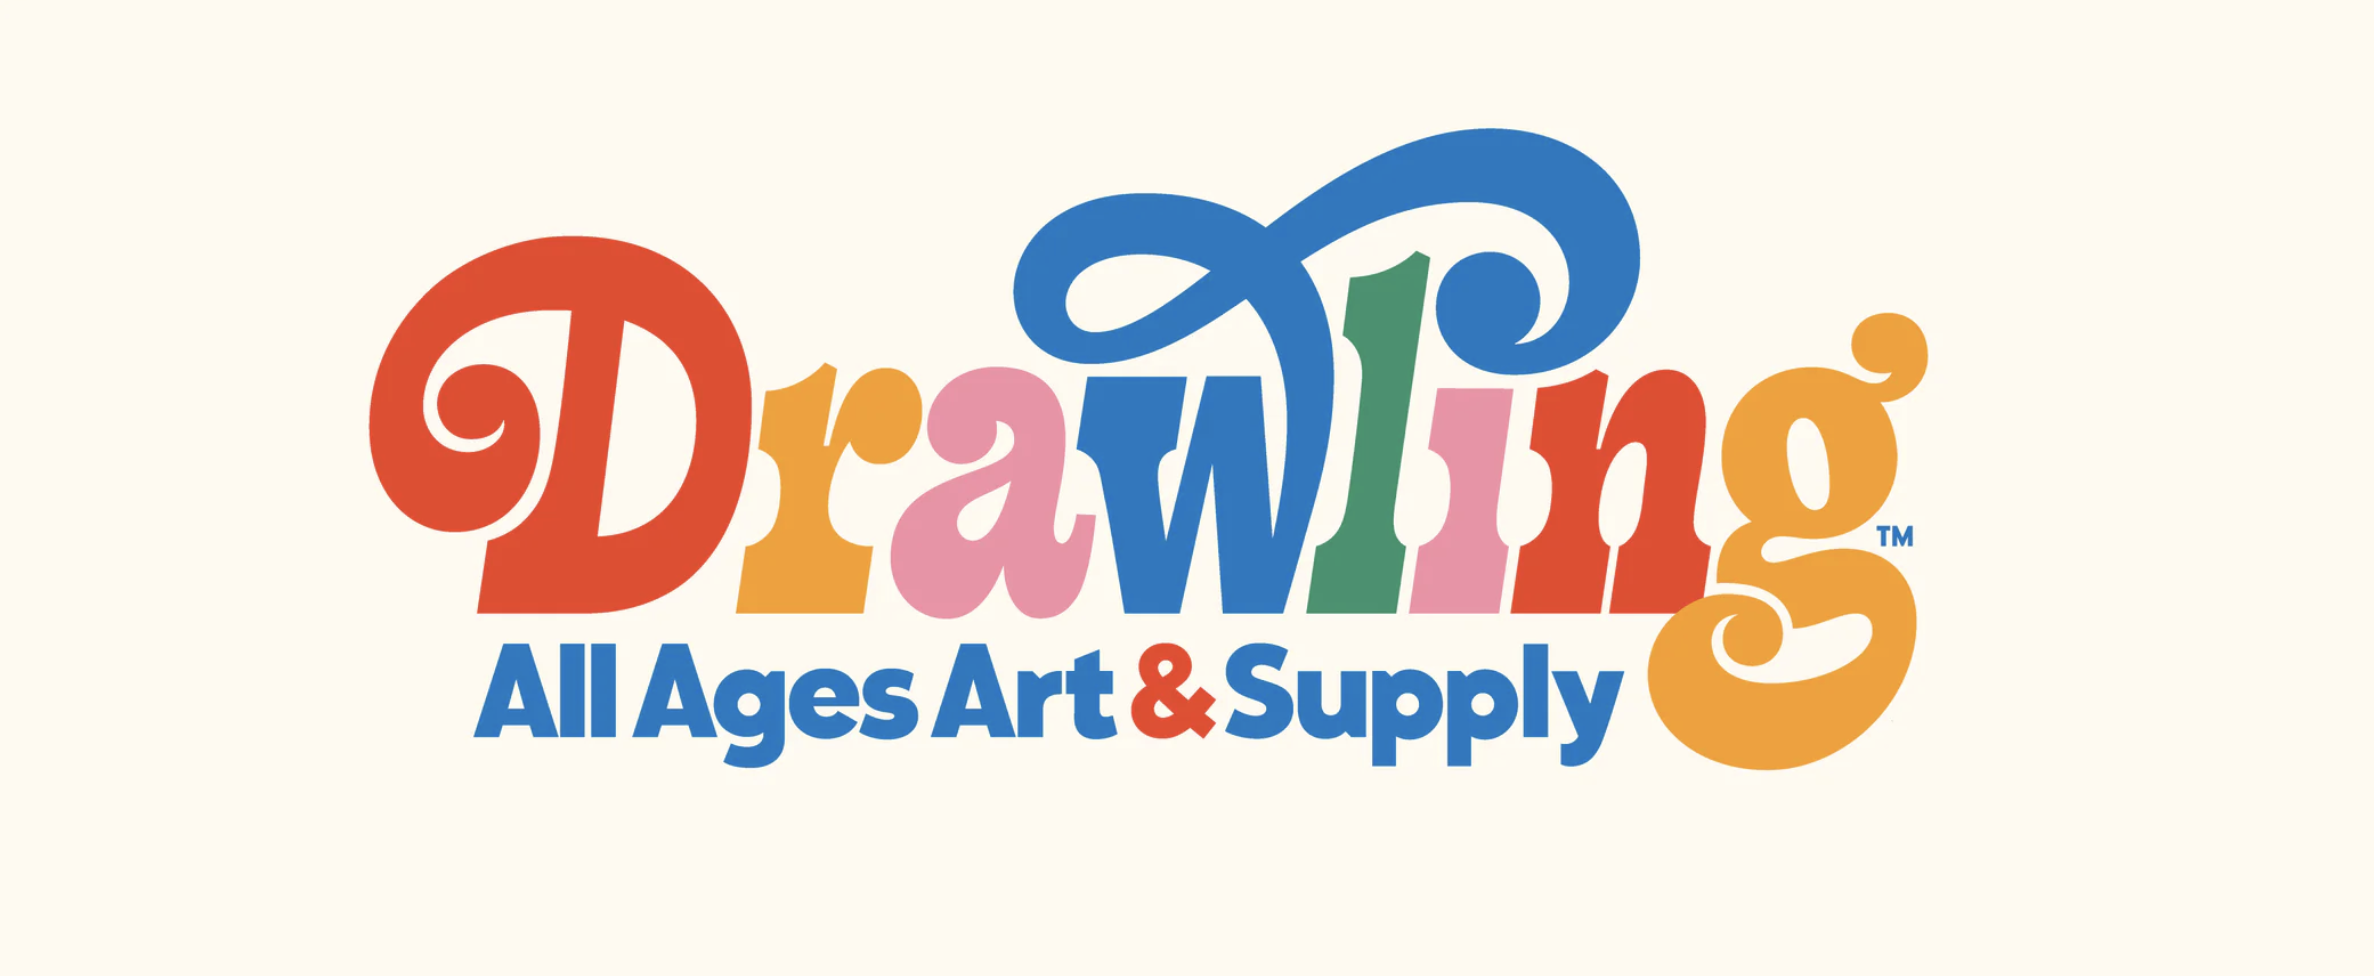 Opening Saturday Nov 25! Drawling: All Ages Art Supply by Jessica Hische!